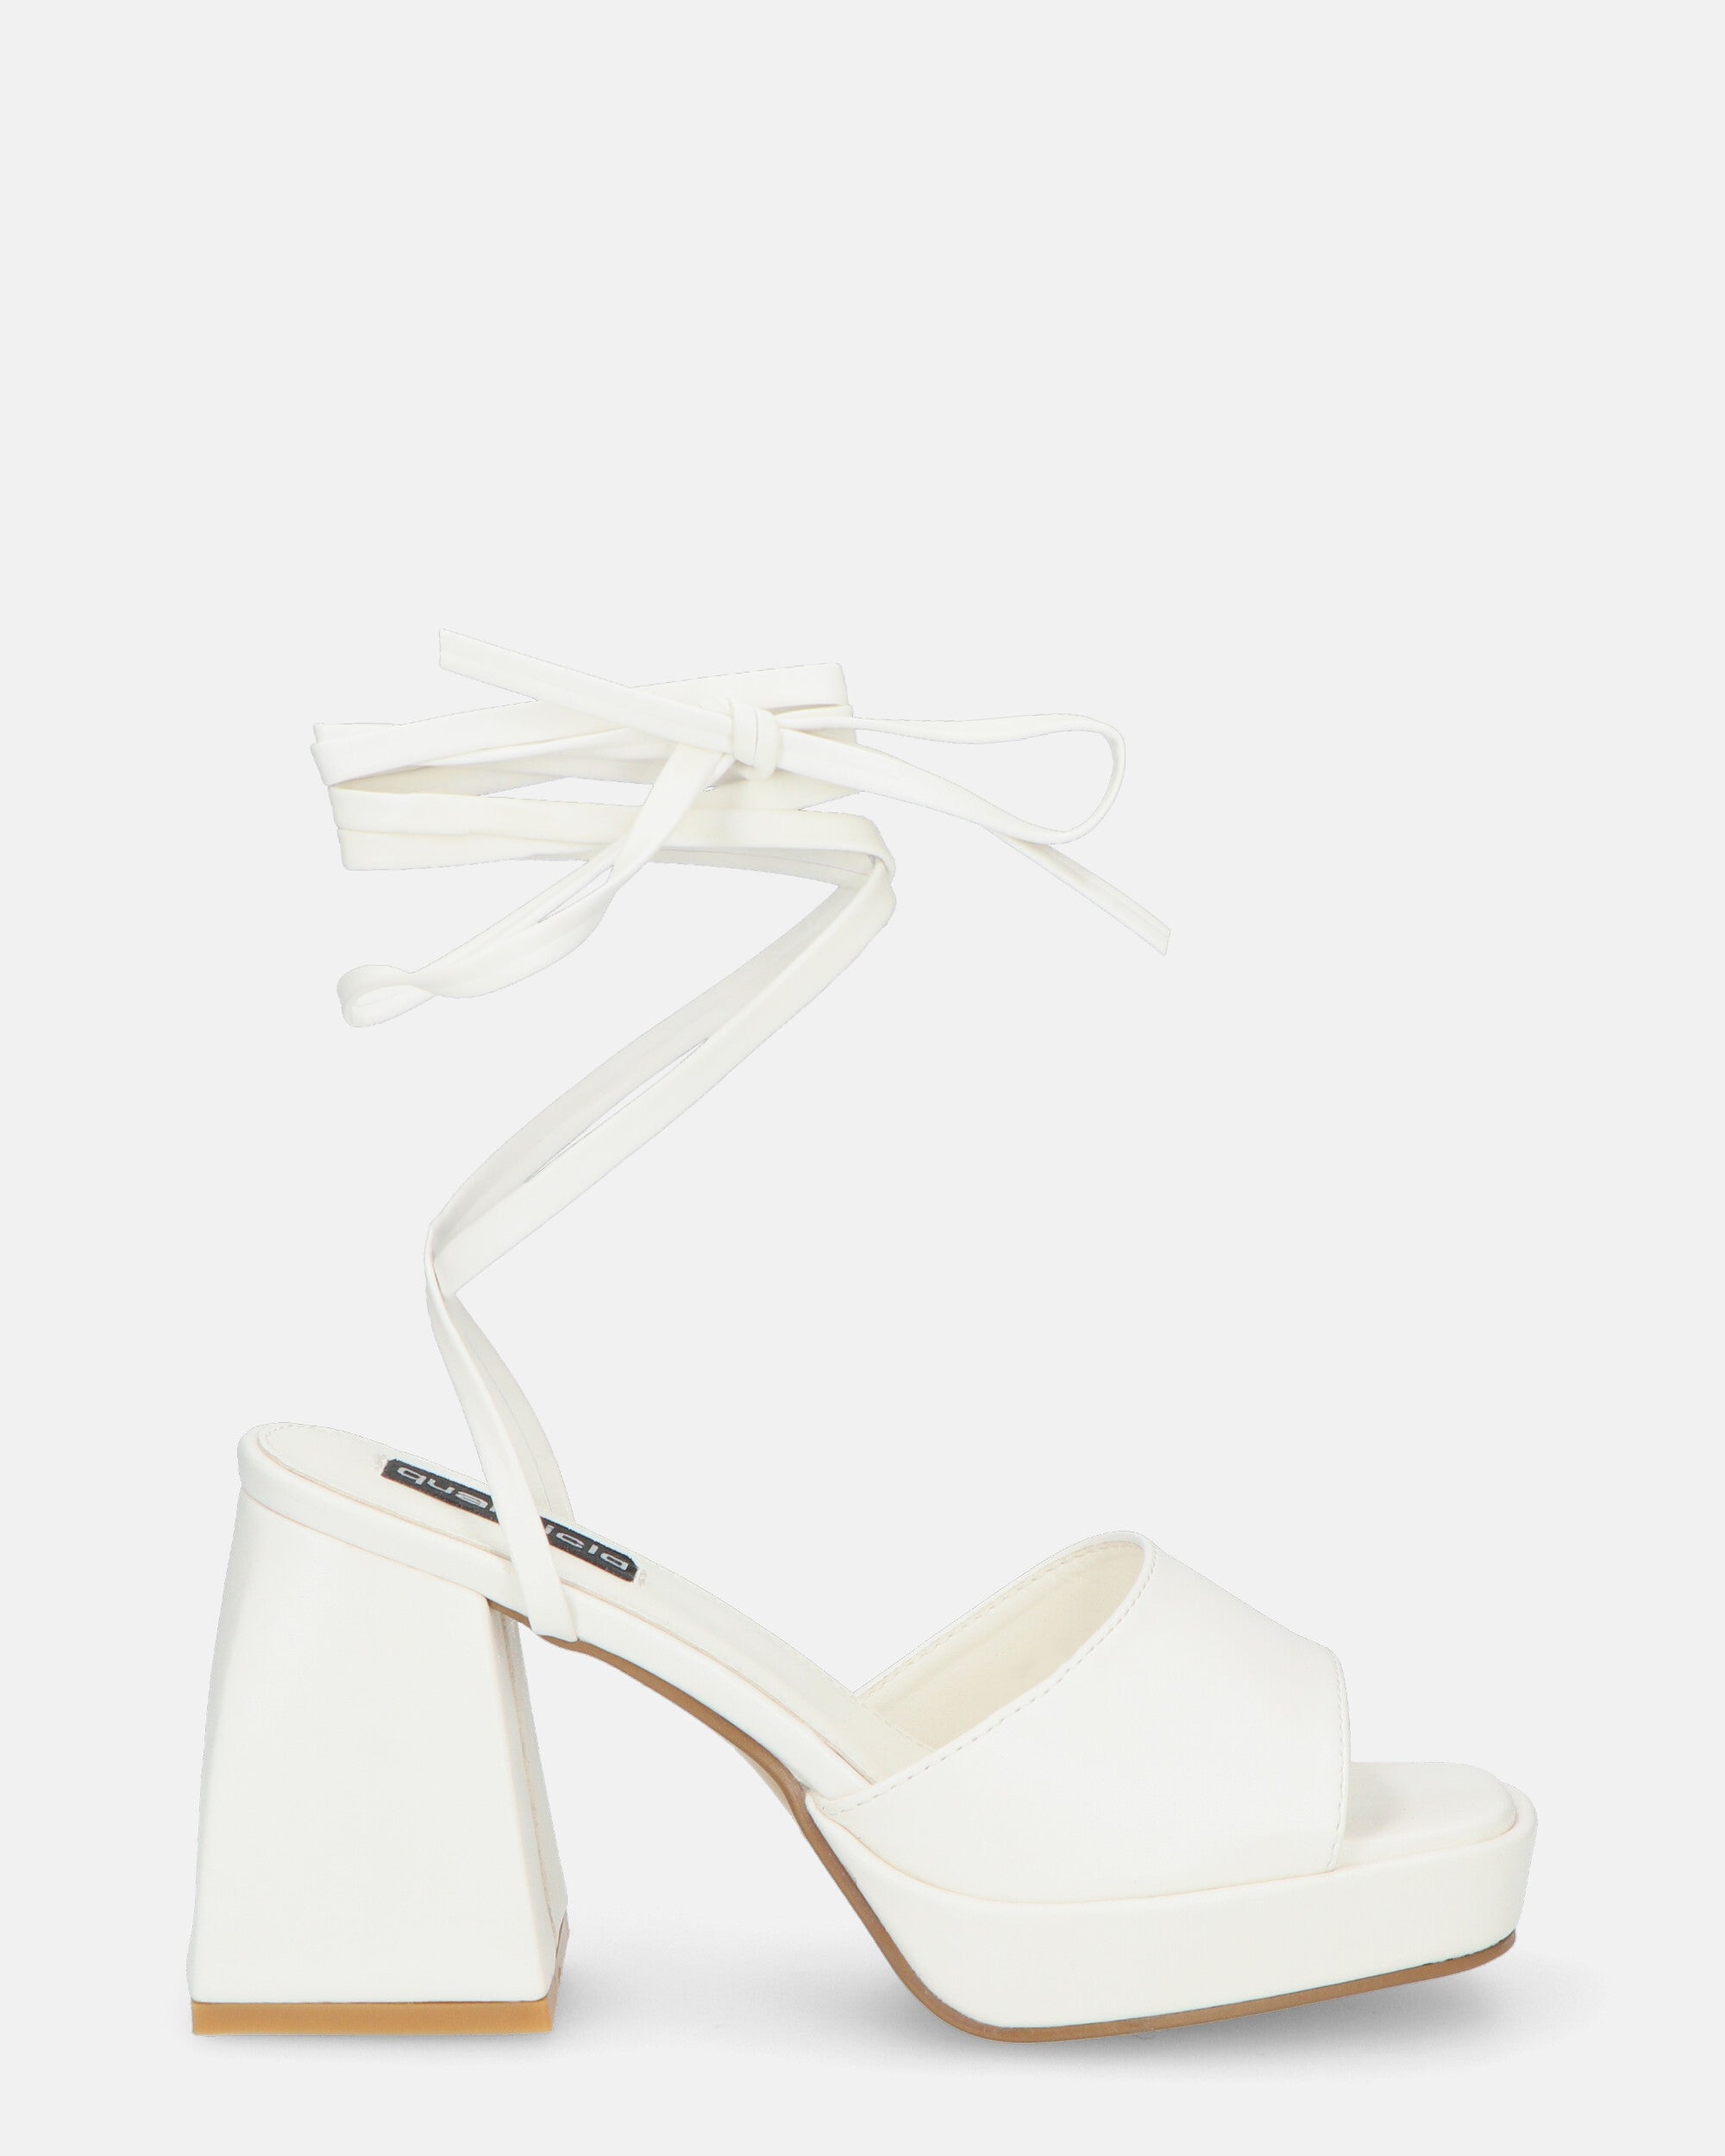 TOMI - sandals in white with laces and squared heel